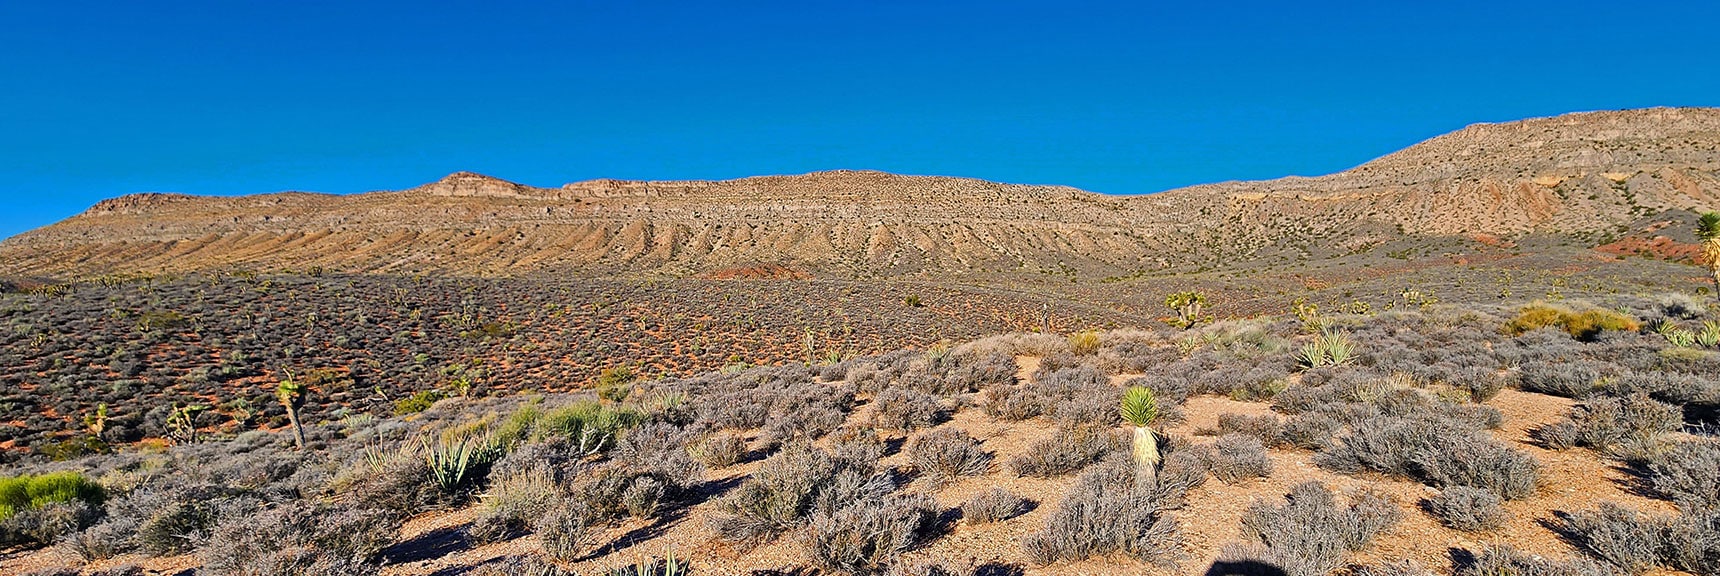 The Eastern Side of Landmark Bluff is Guarded in Most Places by Vertical Headwalls | Landmark Bluff | Lovell Canyon, Nevada